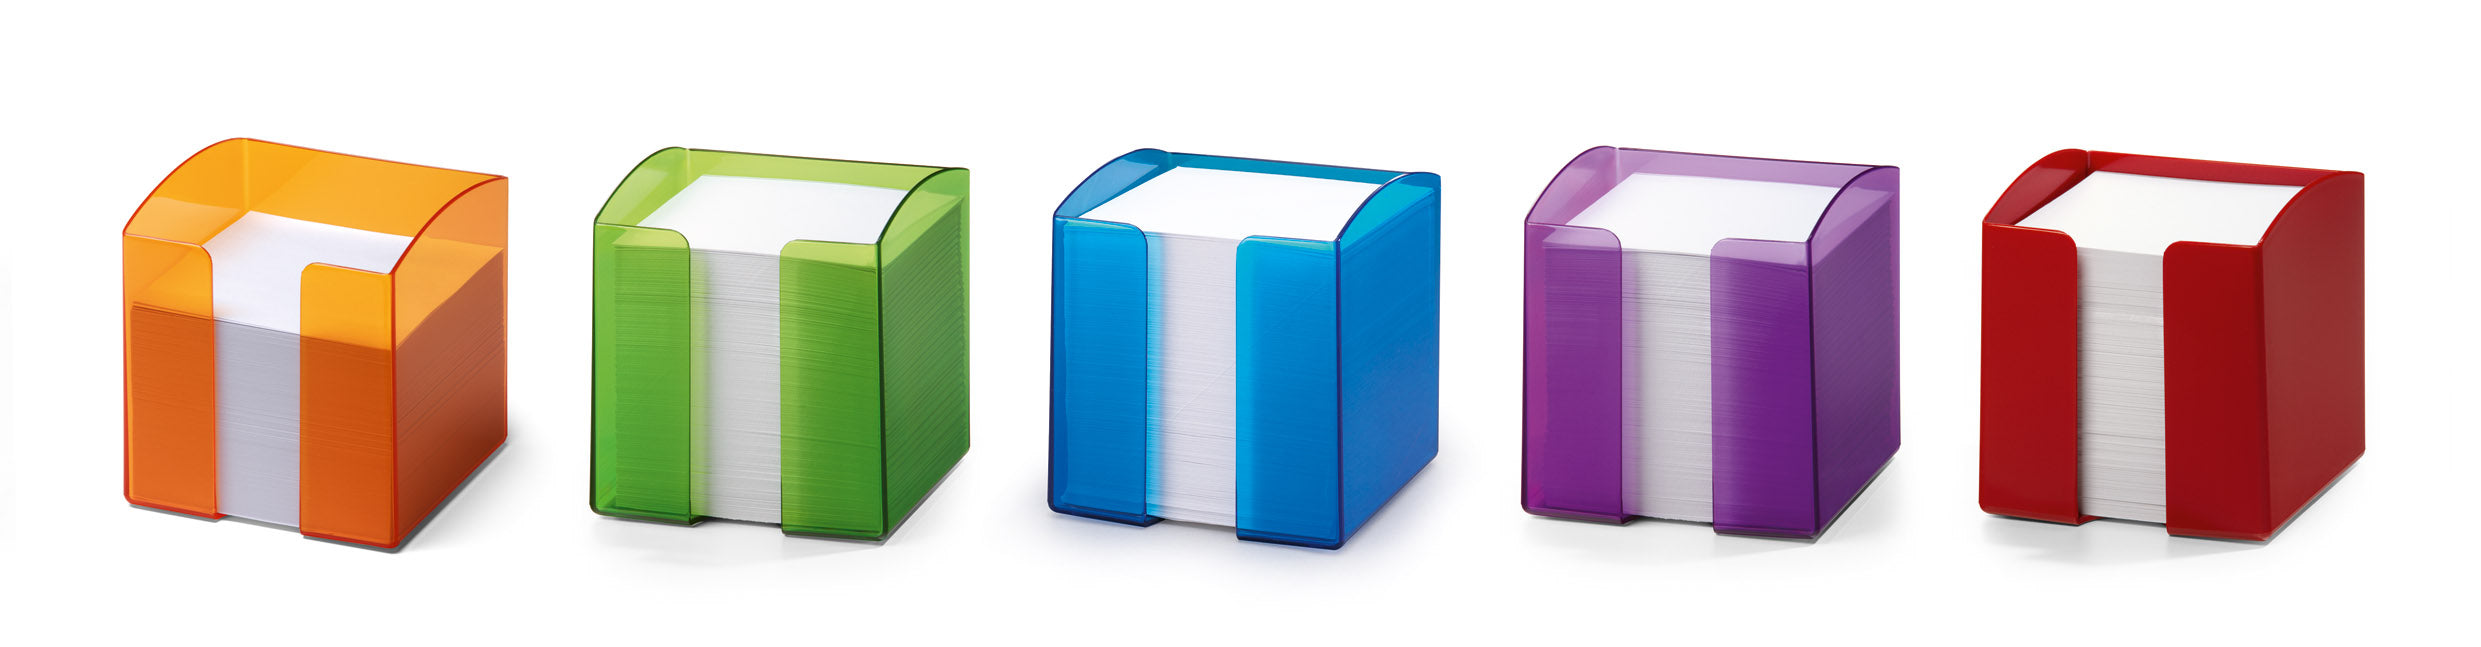 Note Box Cubes